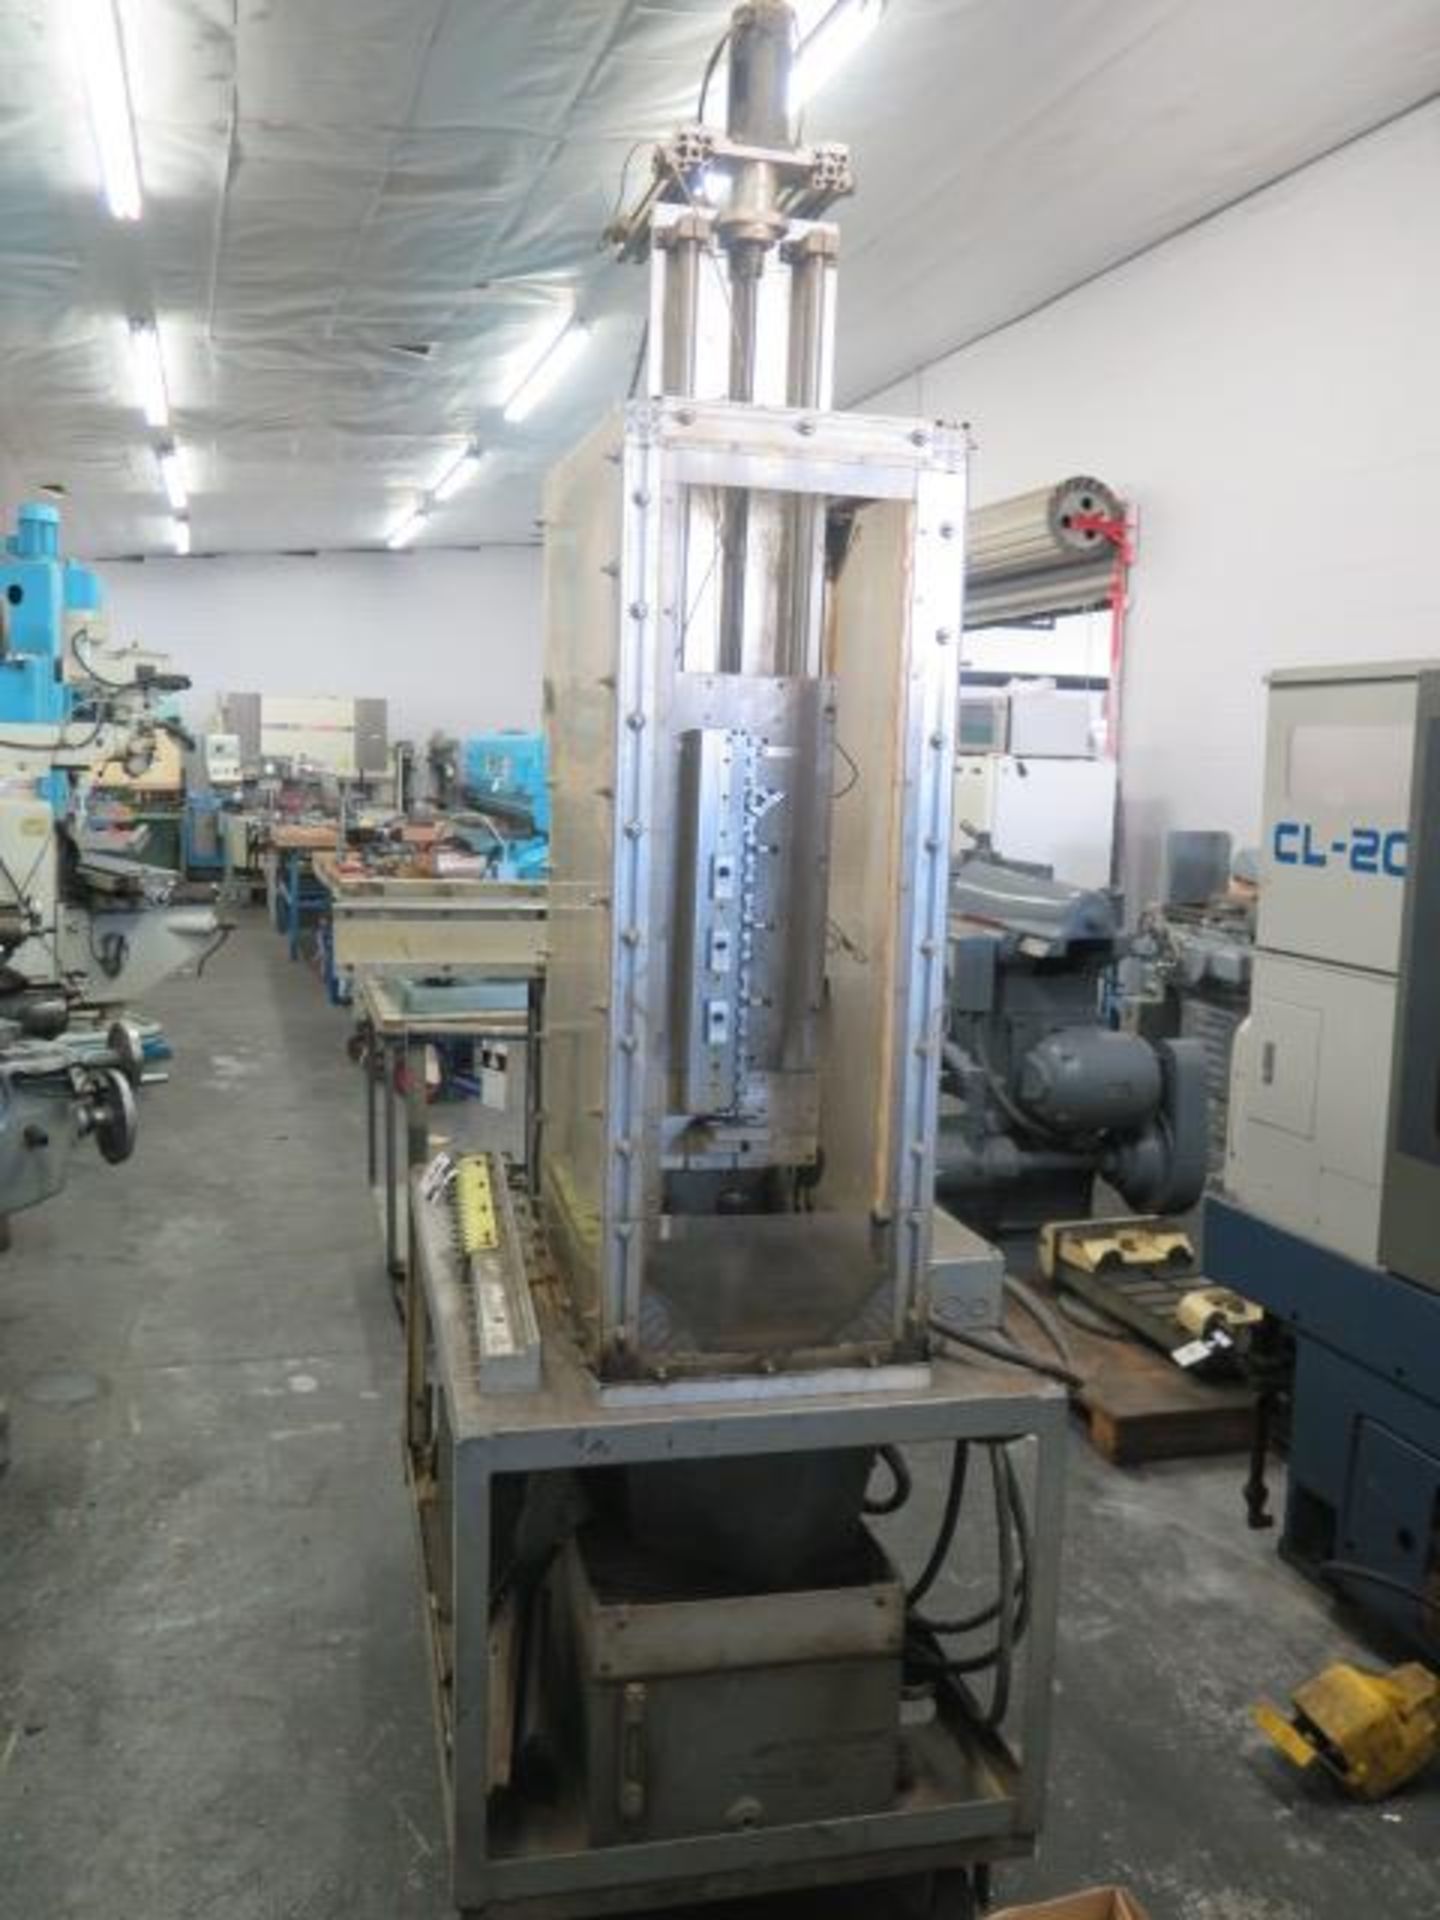 Automated Aerospace Hinge Drilling Machine w/ Computer Controls, Coolant, Cart (SOLD AS-IS - NO